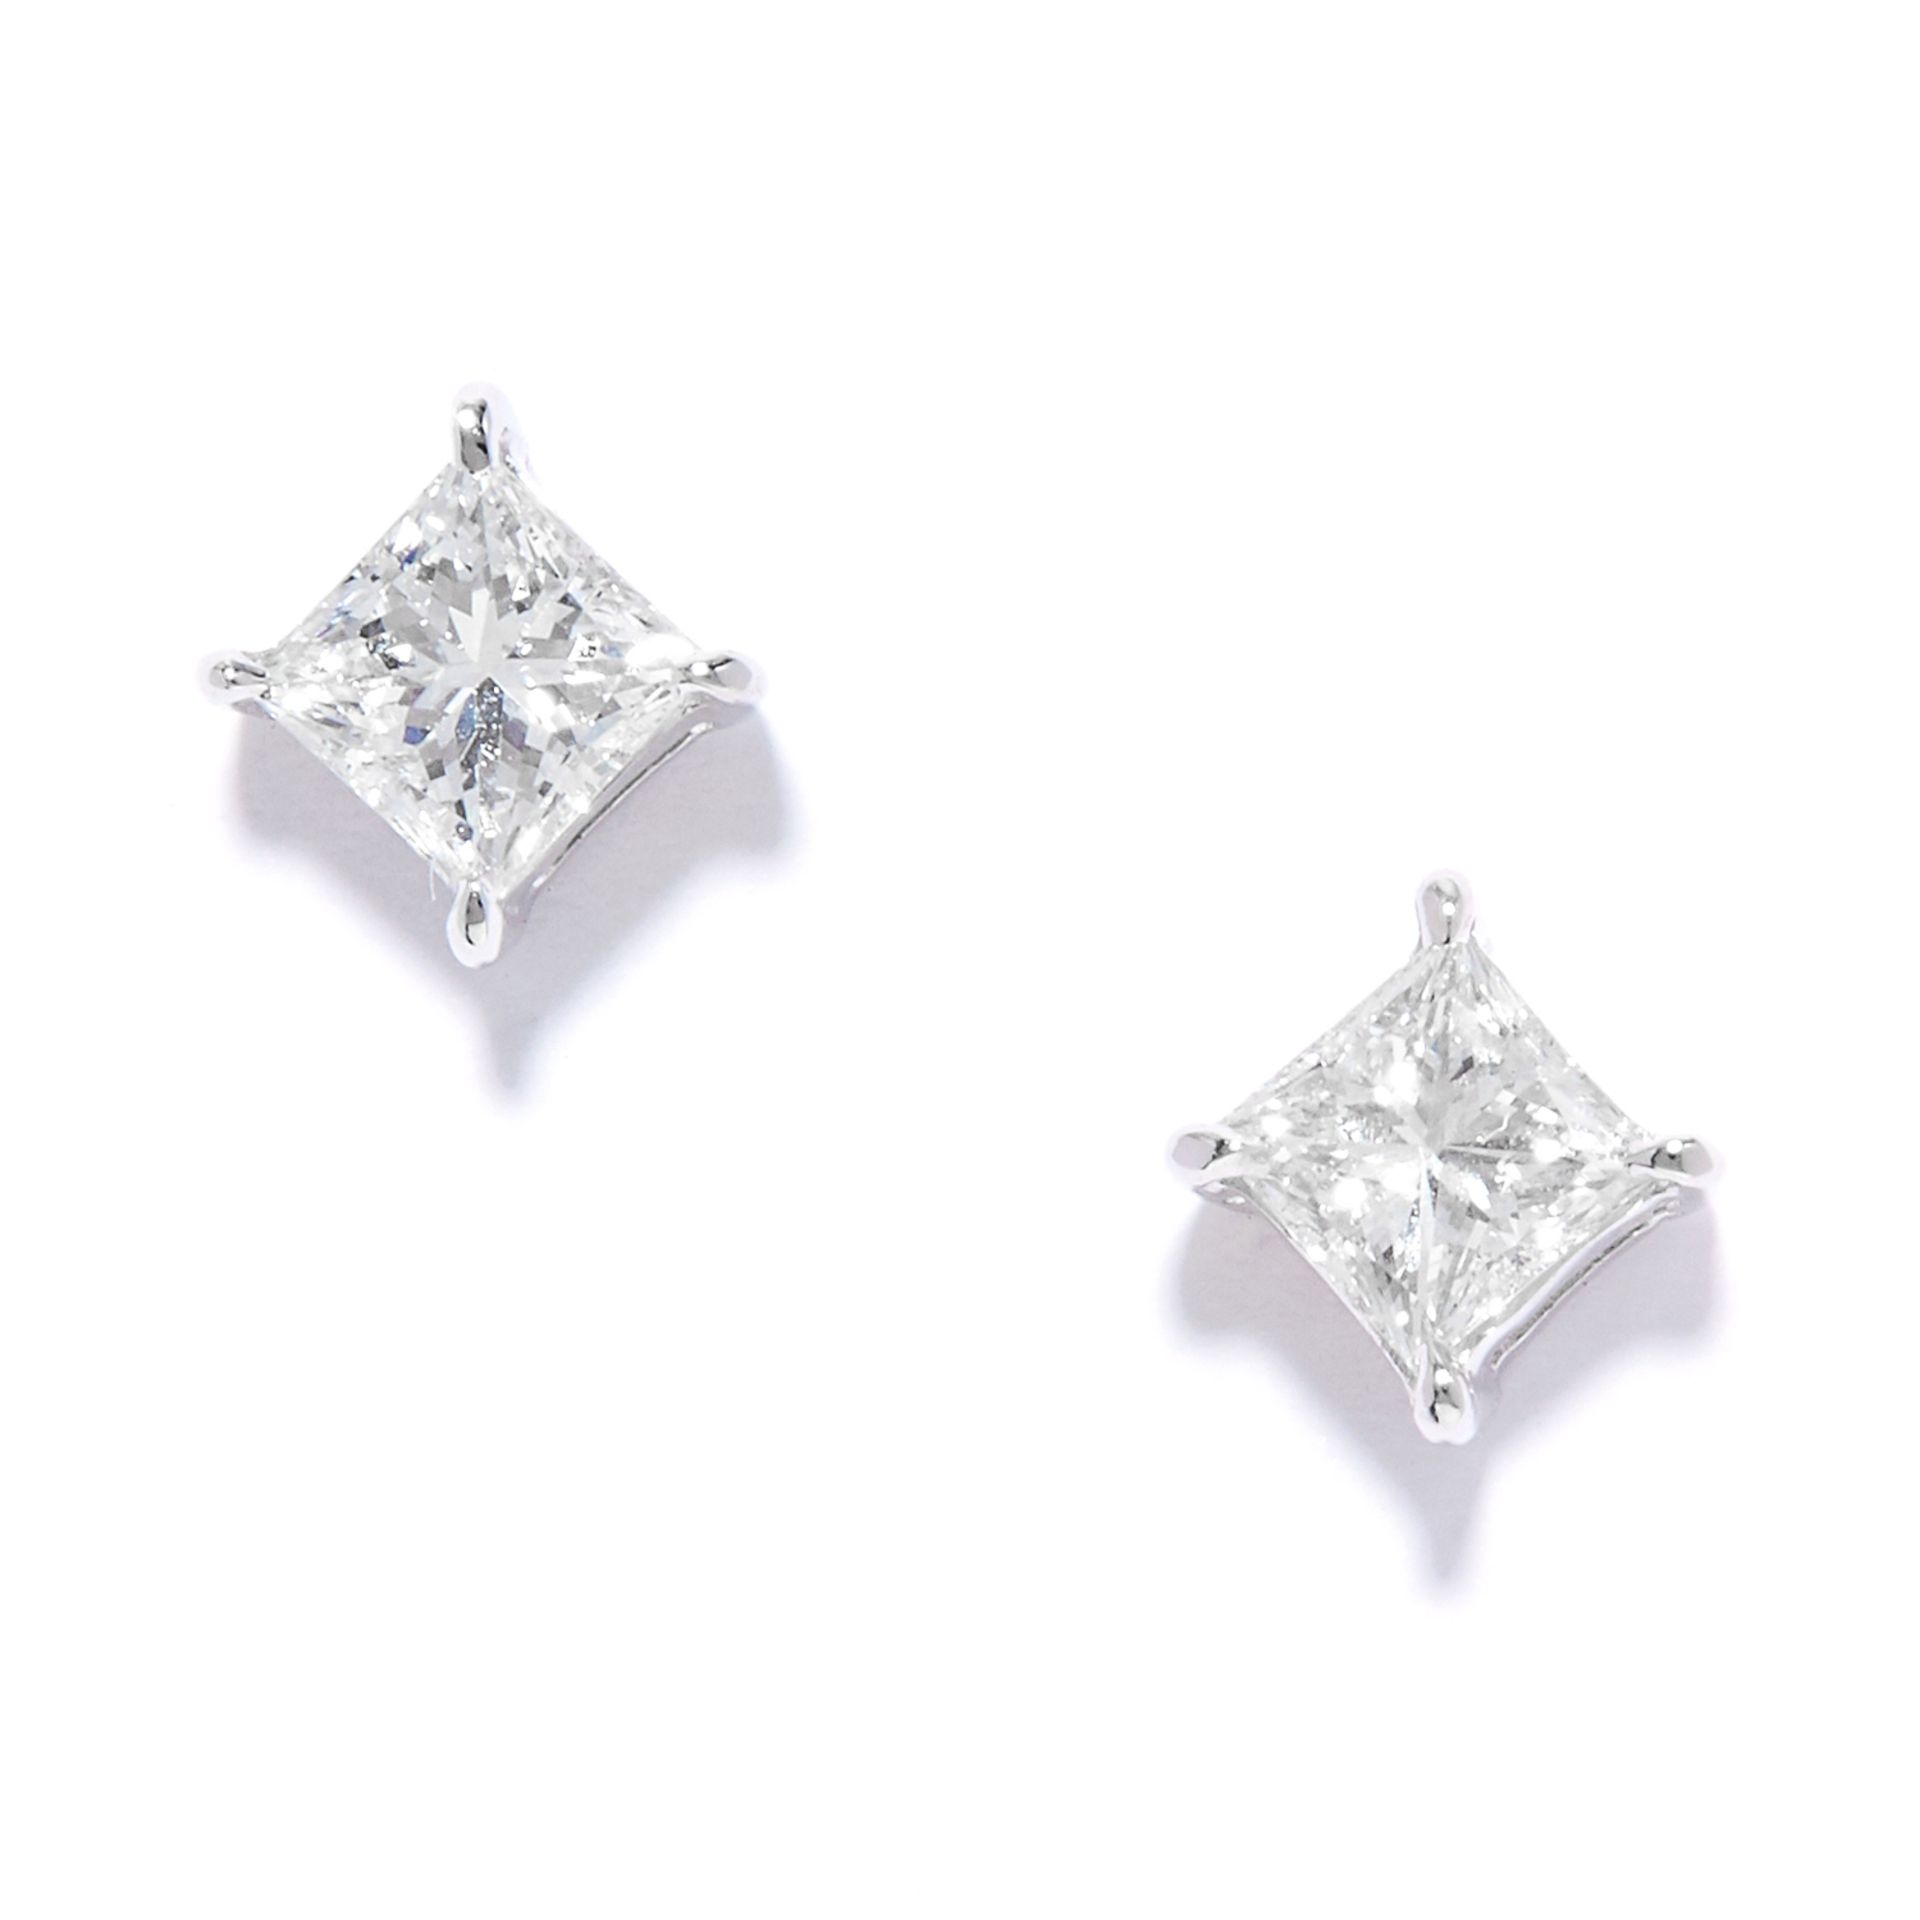 0.66 CARAT DIAMOND EAR STUDS in 18ct white gold, each set with a princess cut diamond totalling